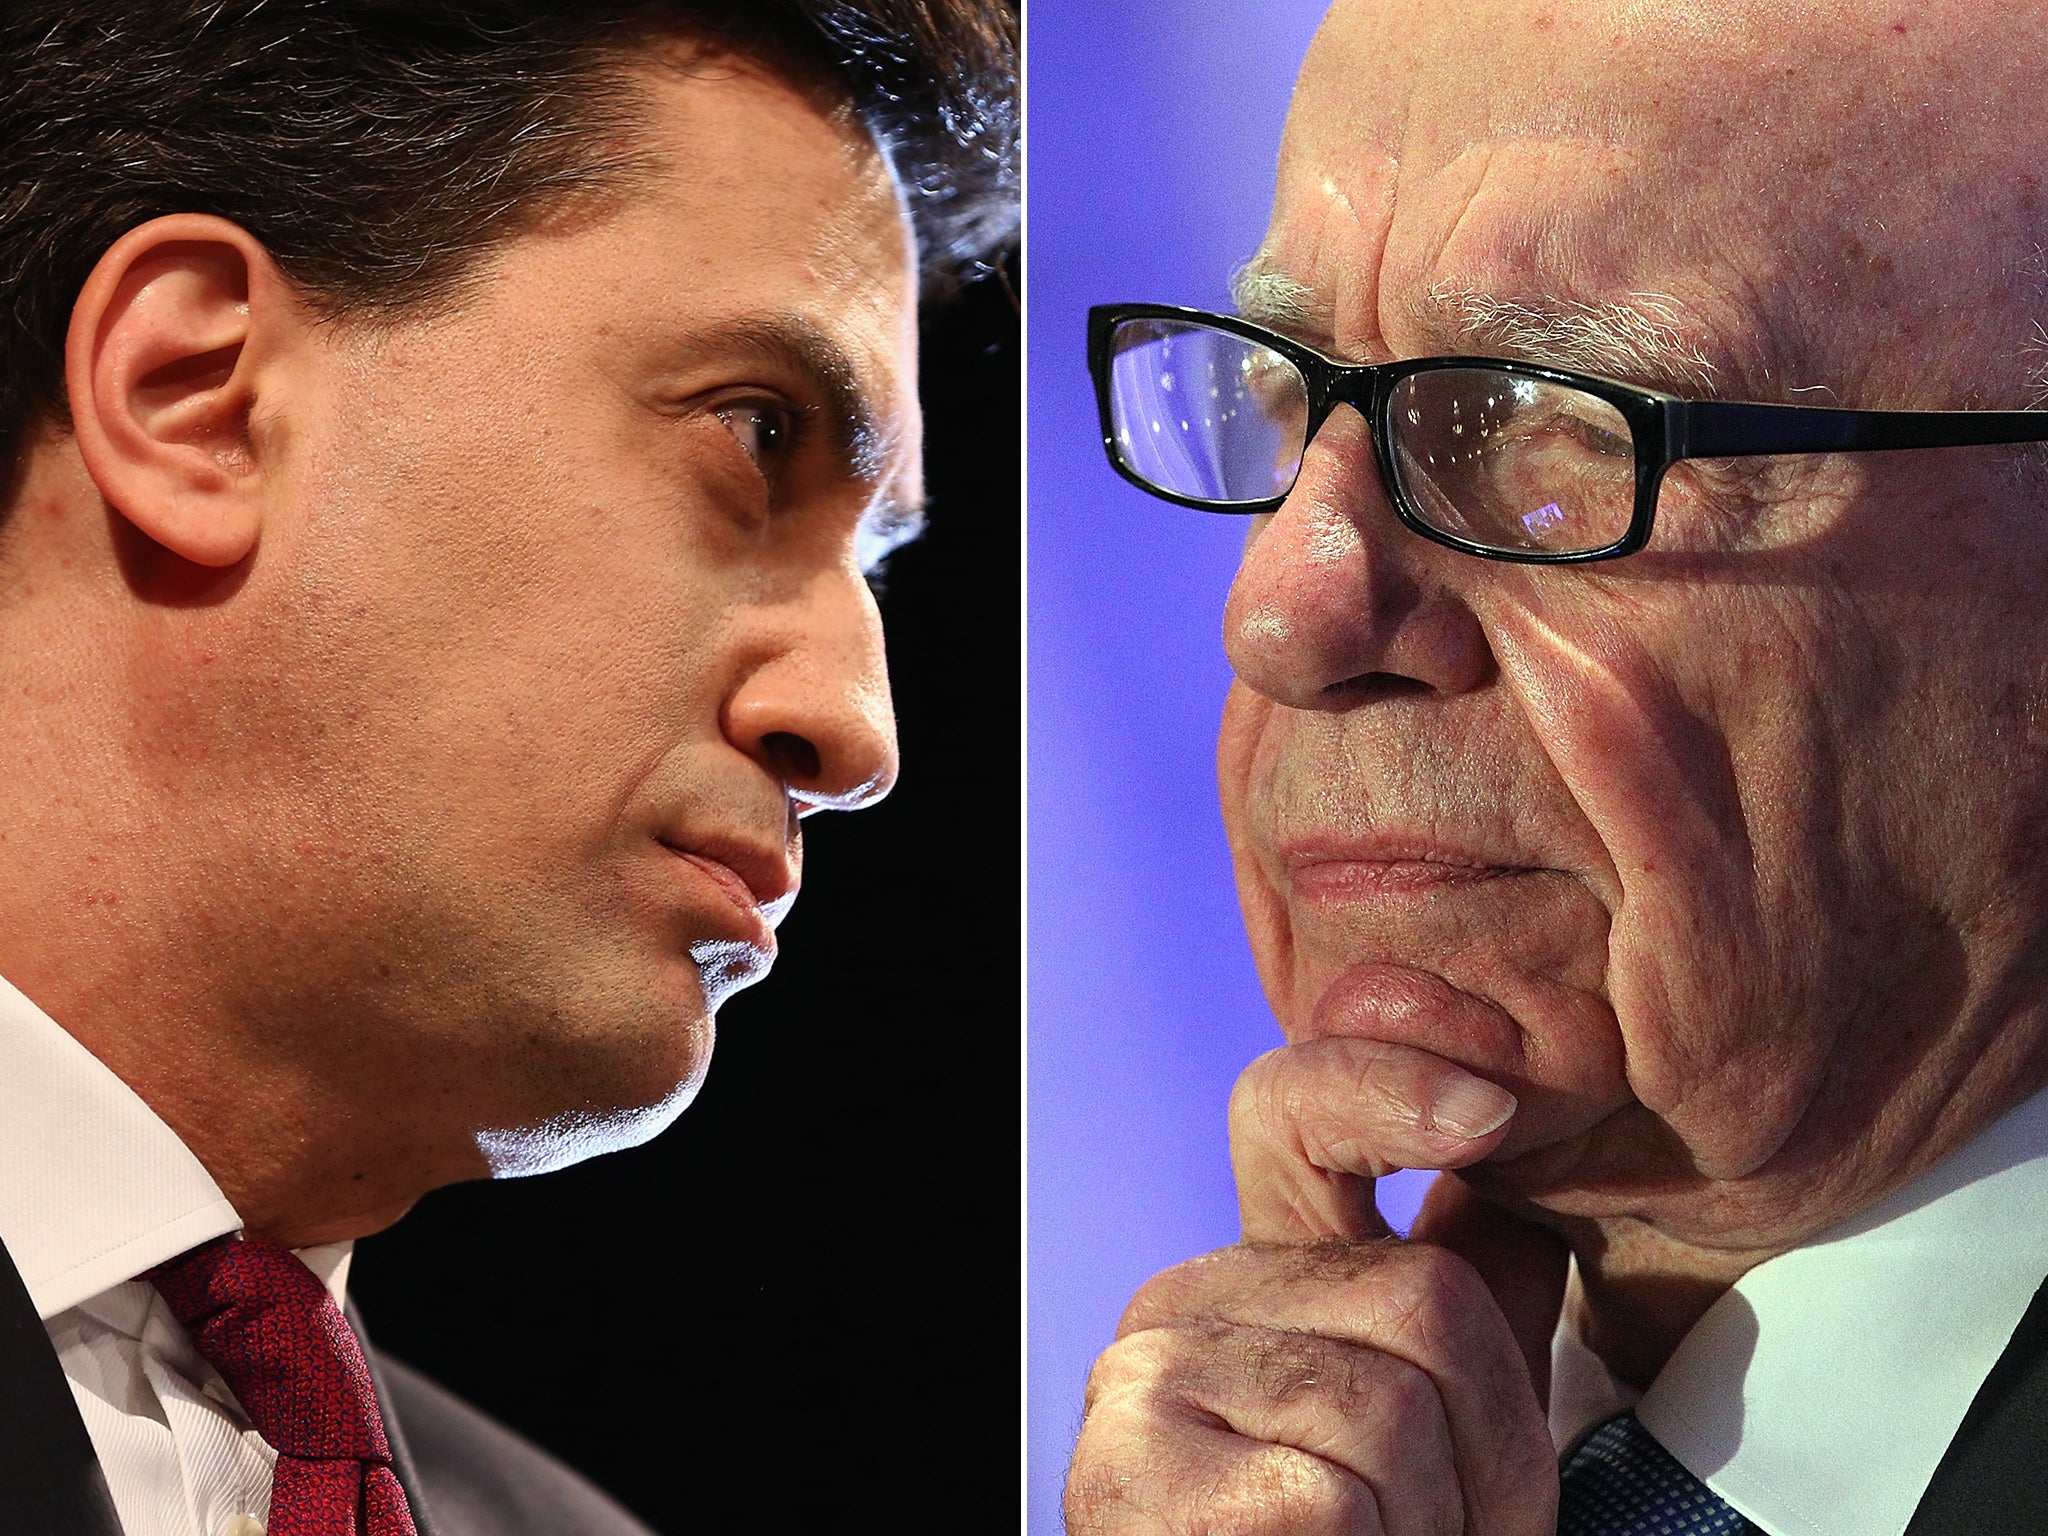 The Labour leader is in for a tough time from Conservative-leaning press until polling day